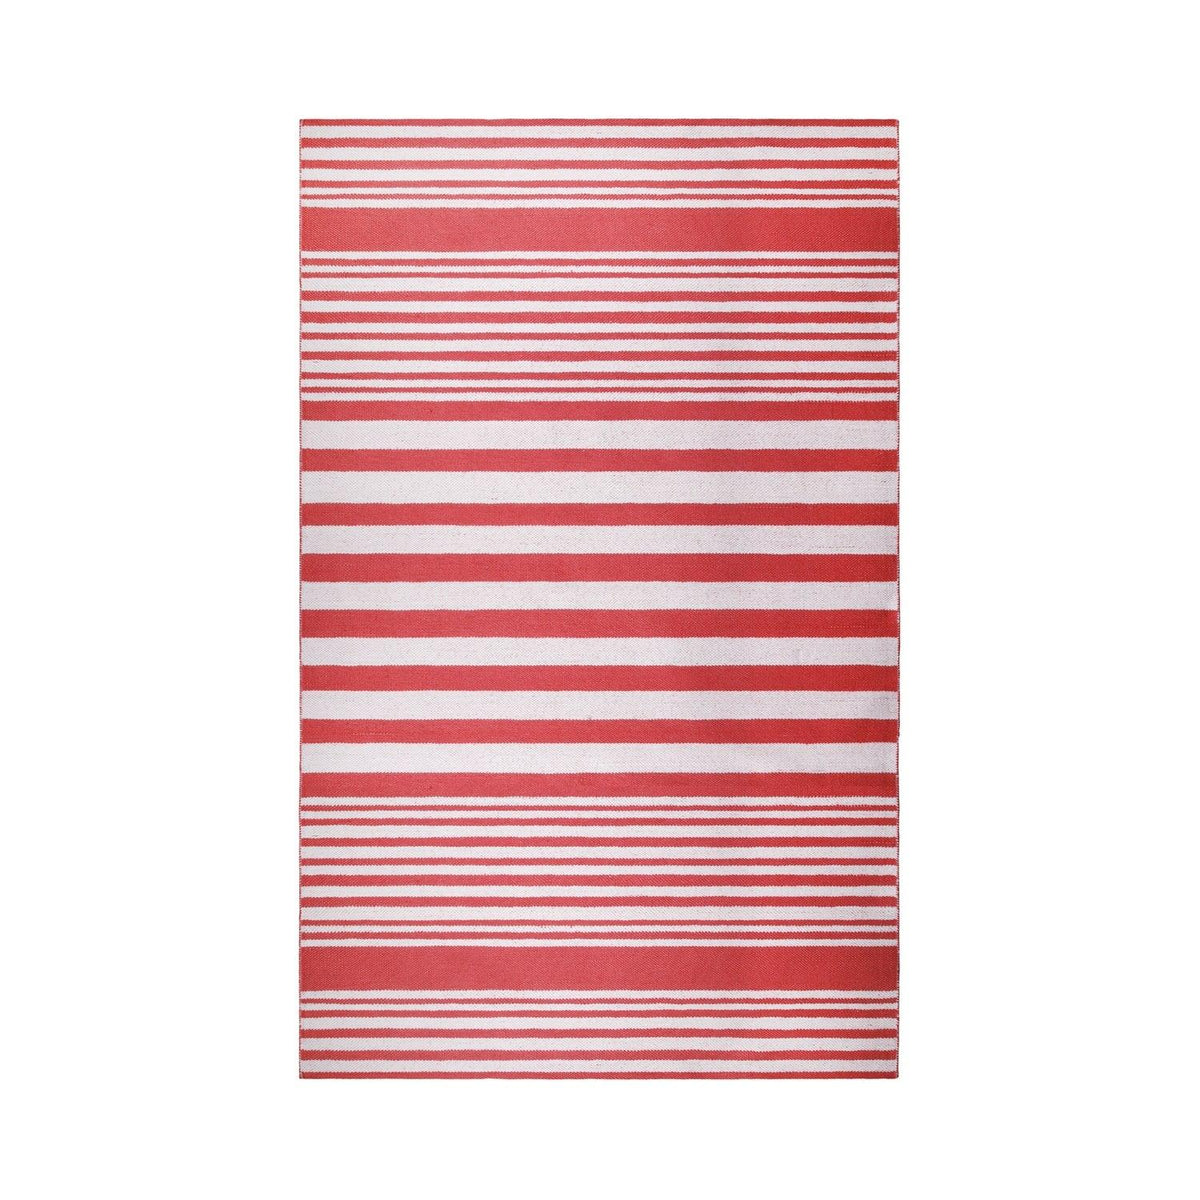  Superior Modern Stripes Large Indoor Outdoor Pattern Area Rug - Red